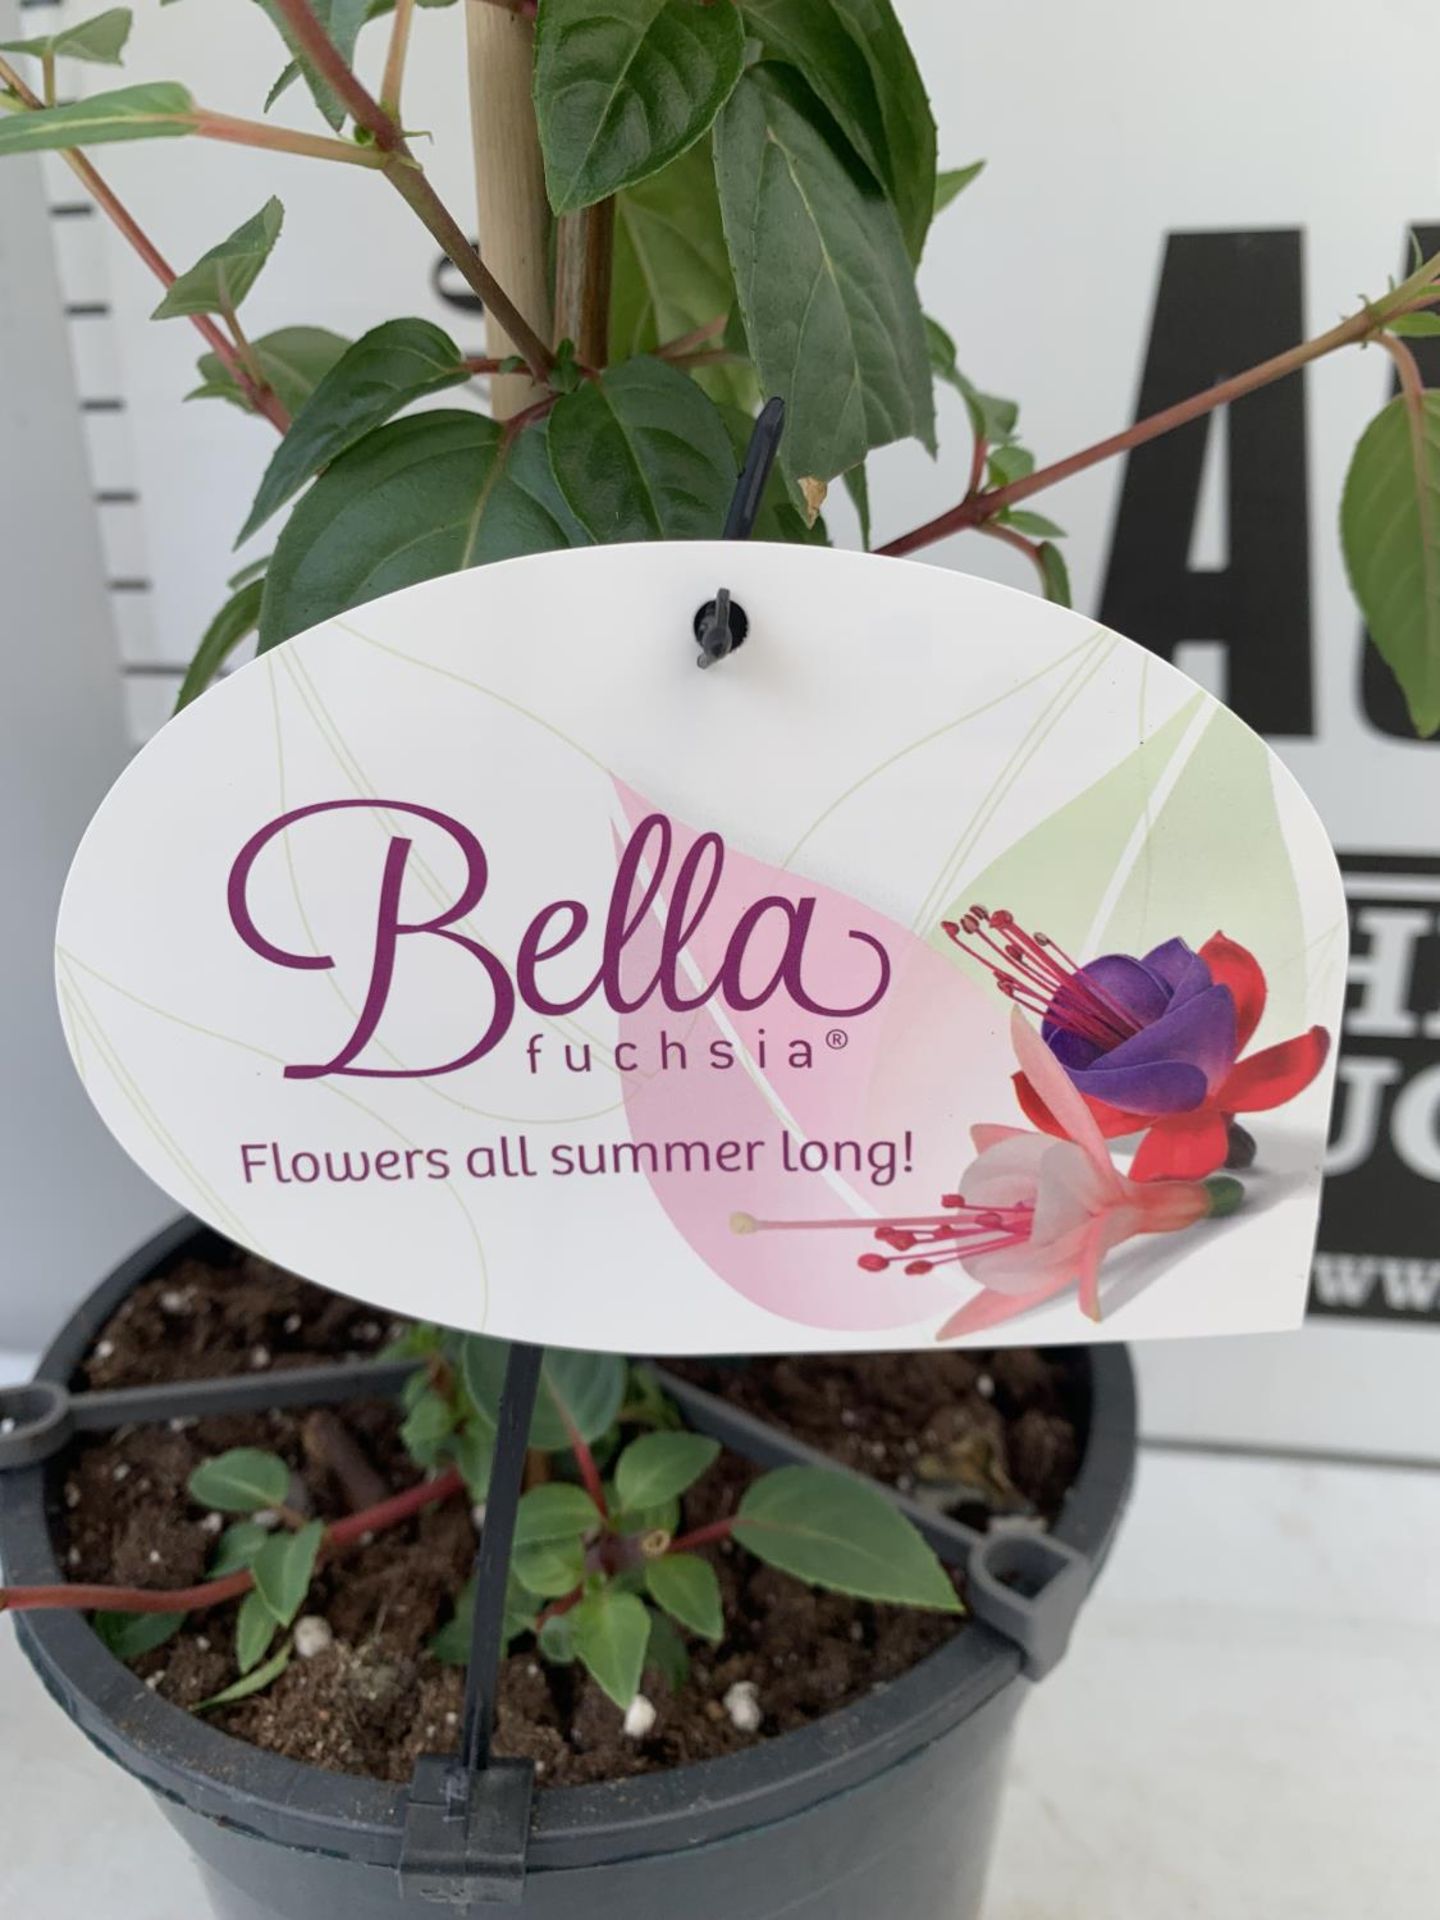 TWO BELLA STANDARD PINK FUCHSIA IN A 3 LTR POTS 70CM -80CM TALL TO BE SOLD FOR THE TWO PLUS VAT - Image 5 of 5